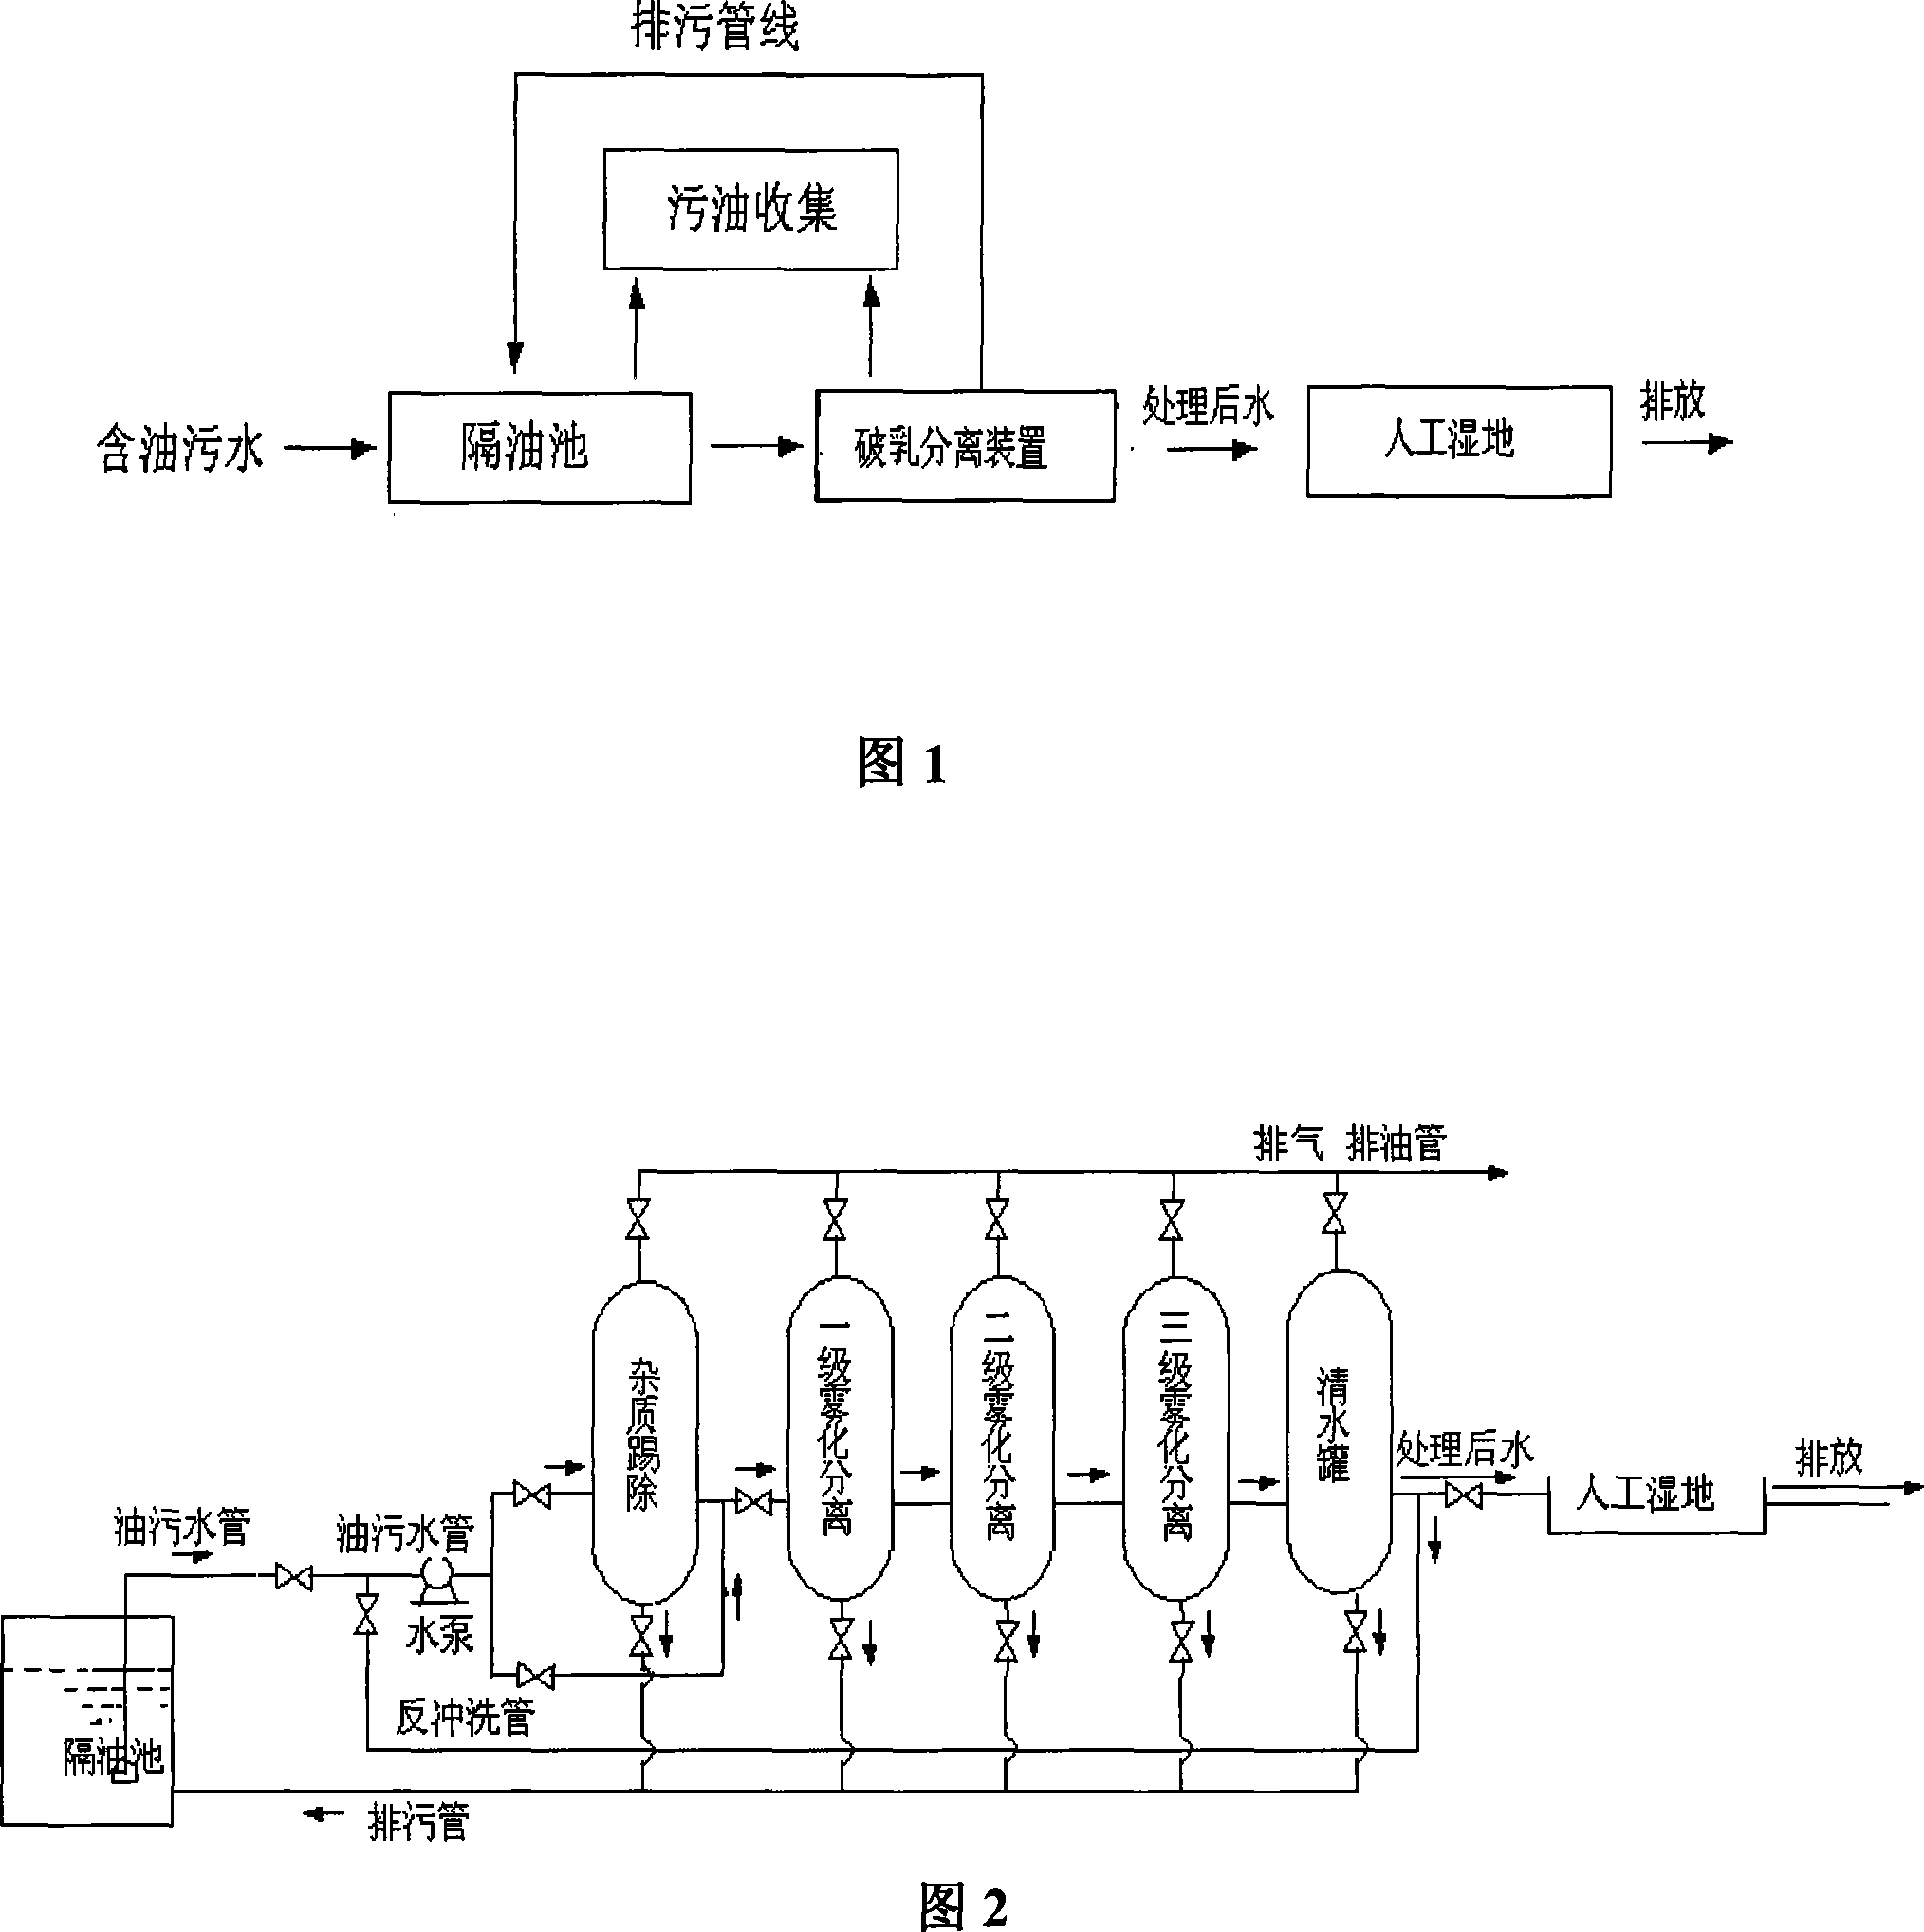 Oil-containing sewage treatment system